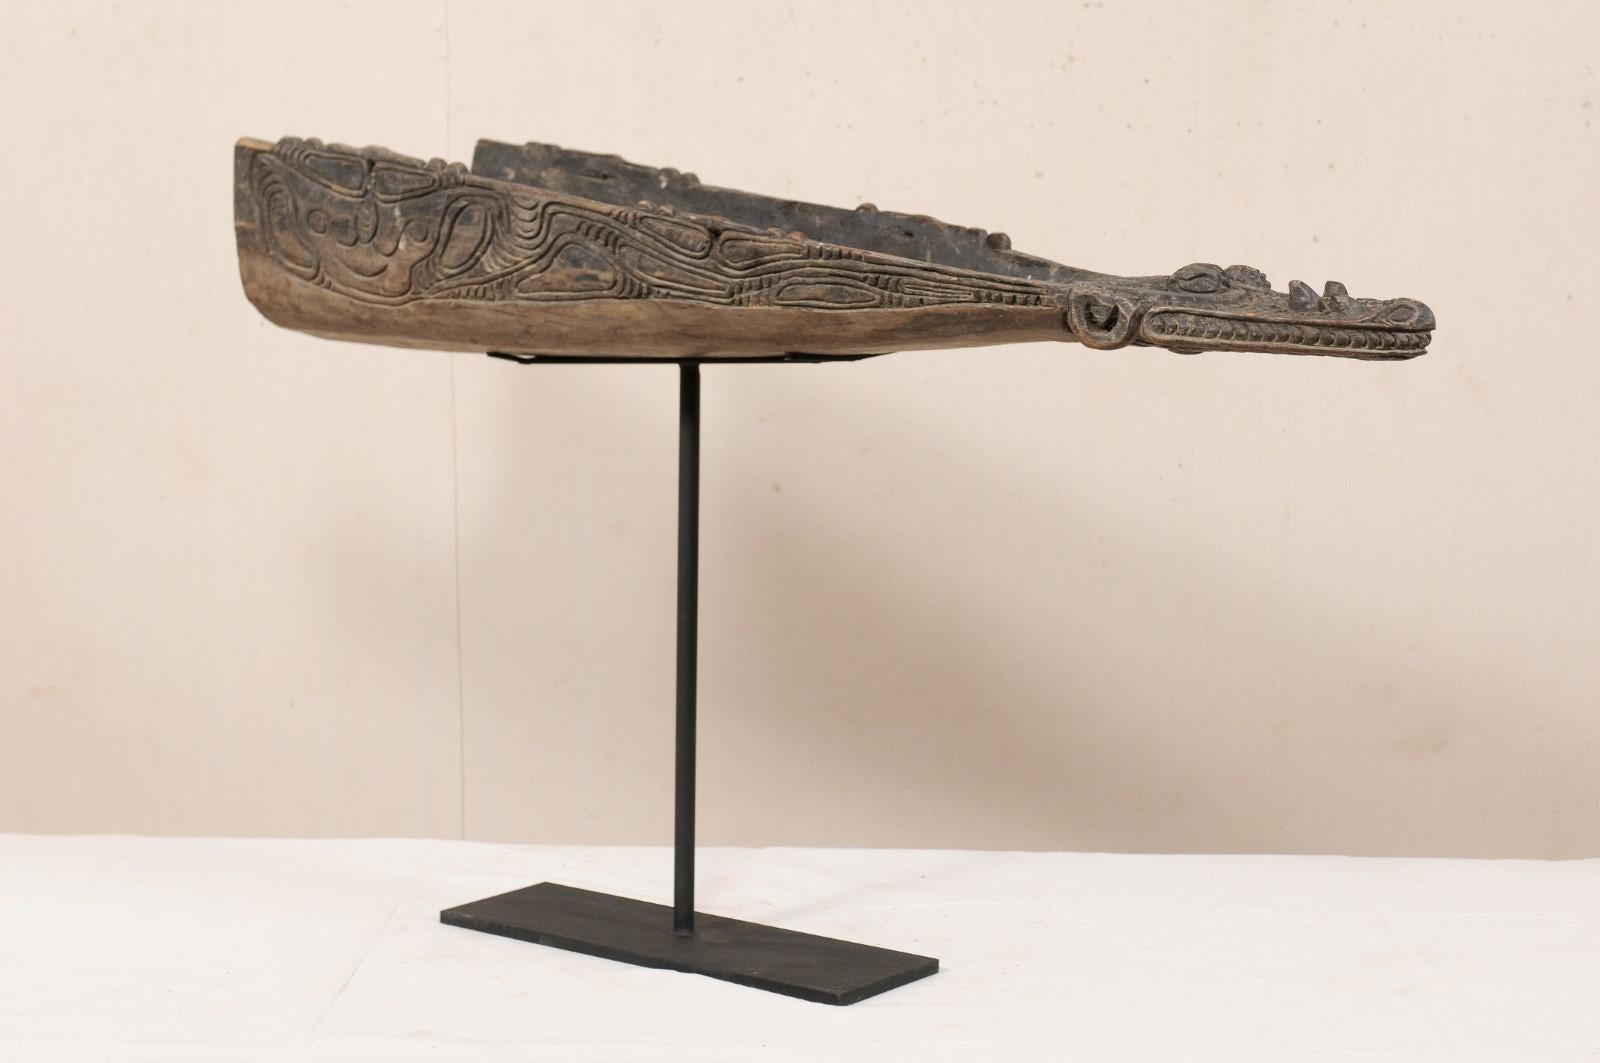 A vintage carved wood crocodile head boat prow from Papua New Guinea. This mid-20th century Papua New Guinean boat prow has been carved out of wood and features the head of a crocodile. This boat prow is displayed and supported on a custom black